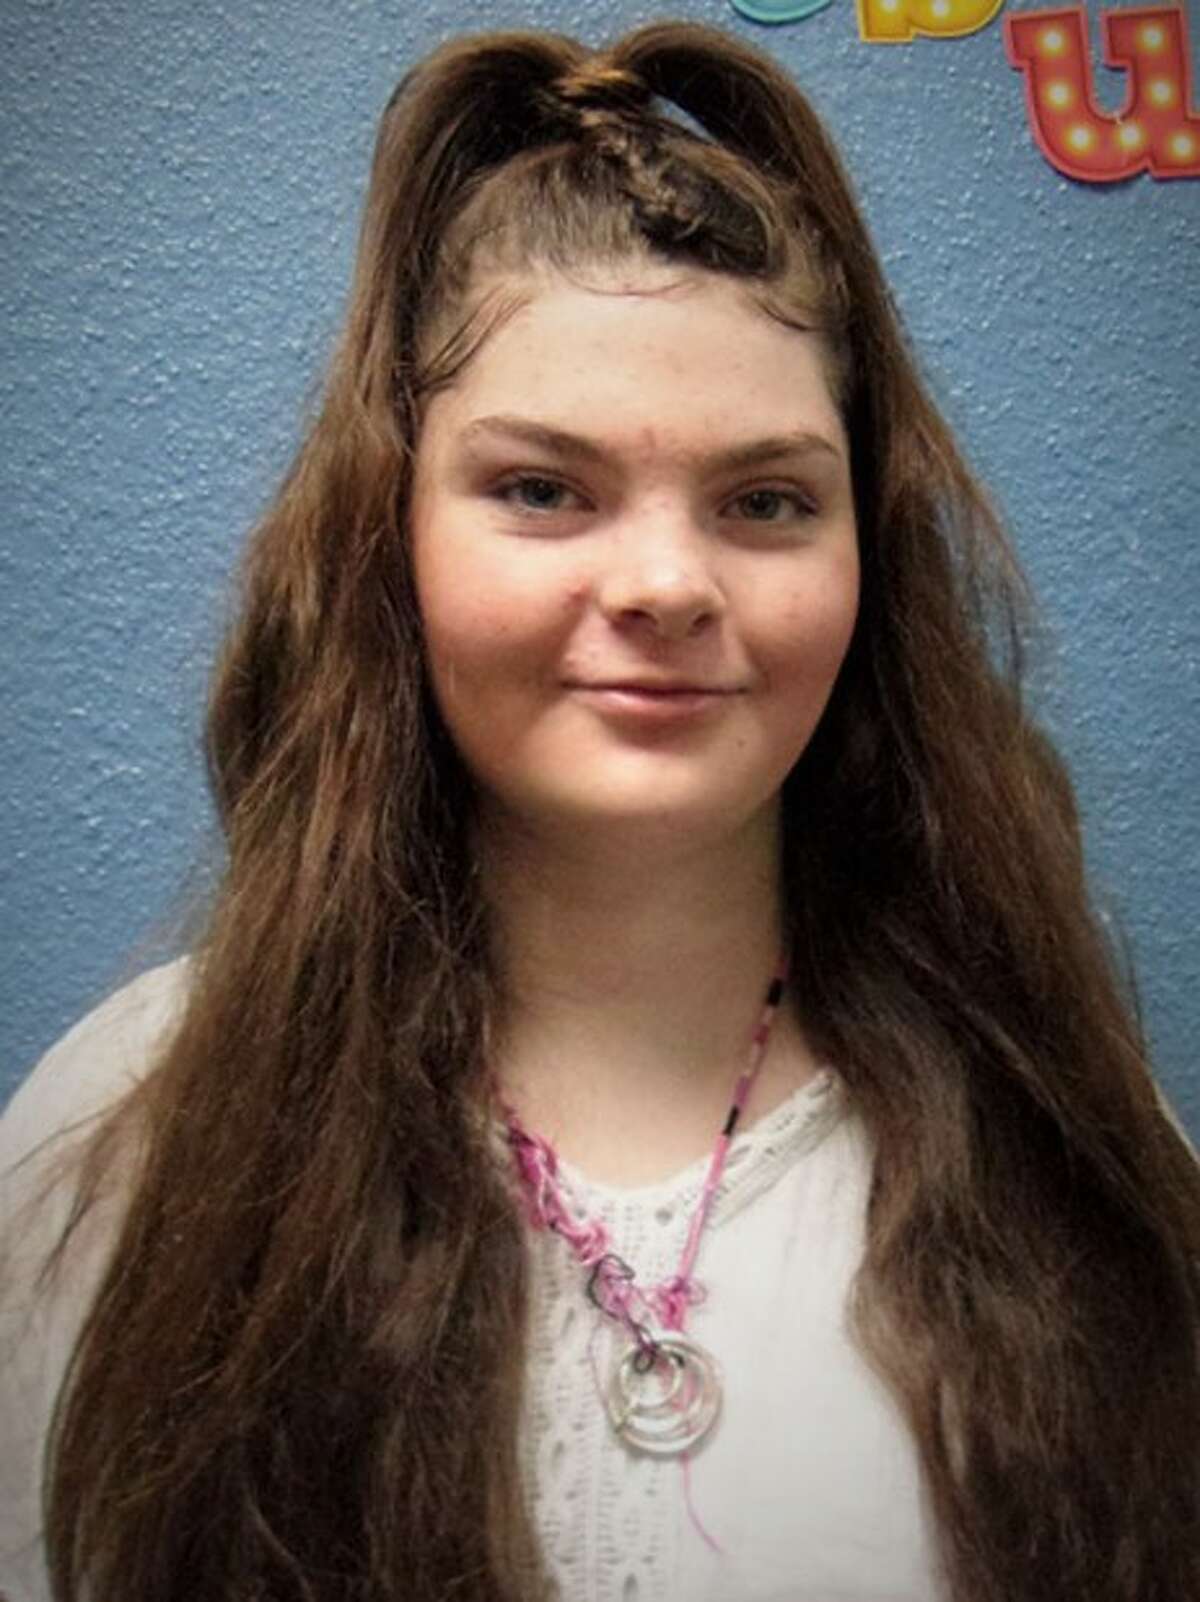 Ashlynn is among the children listed on the Texas Adoption Resource Exchange (TARE) website. Visit https://www.dfps.state.tx.us/Application/TARE/Home.aspx/Default for more details.